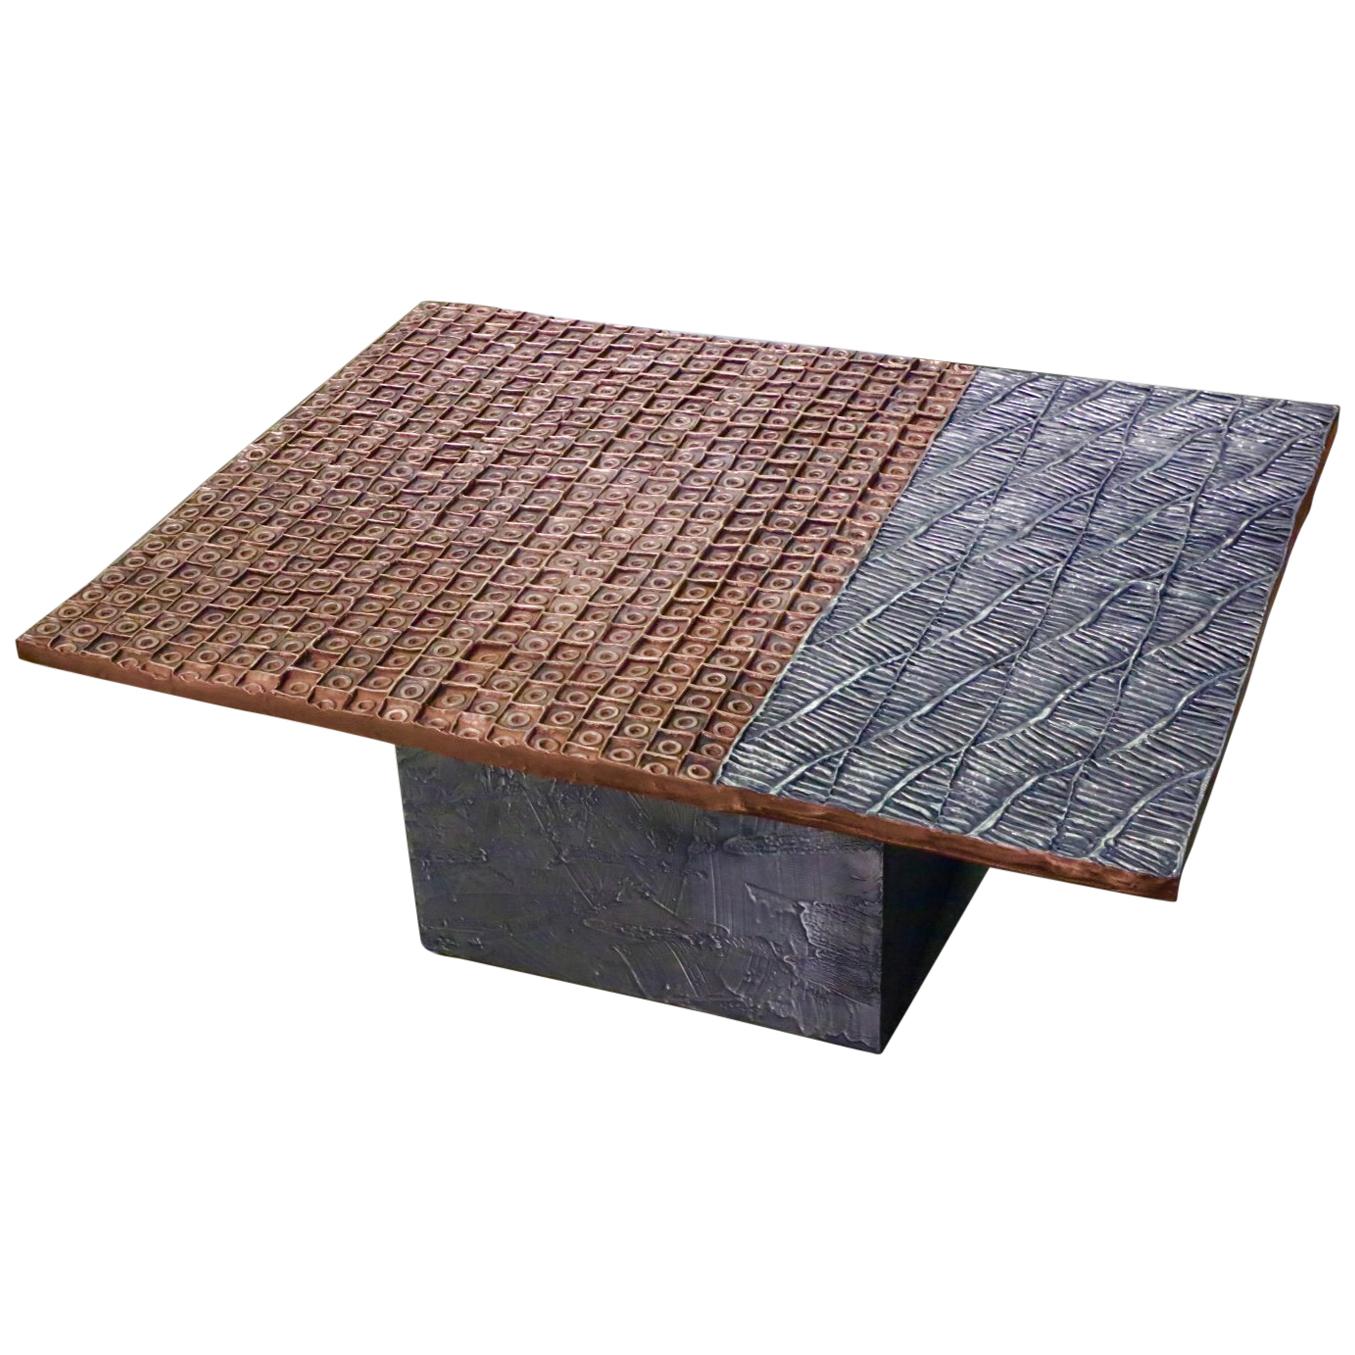 Copper and Stainless Coated Terracotta Table For Sale